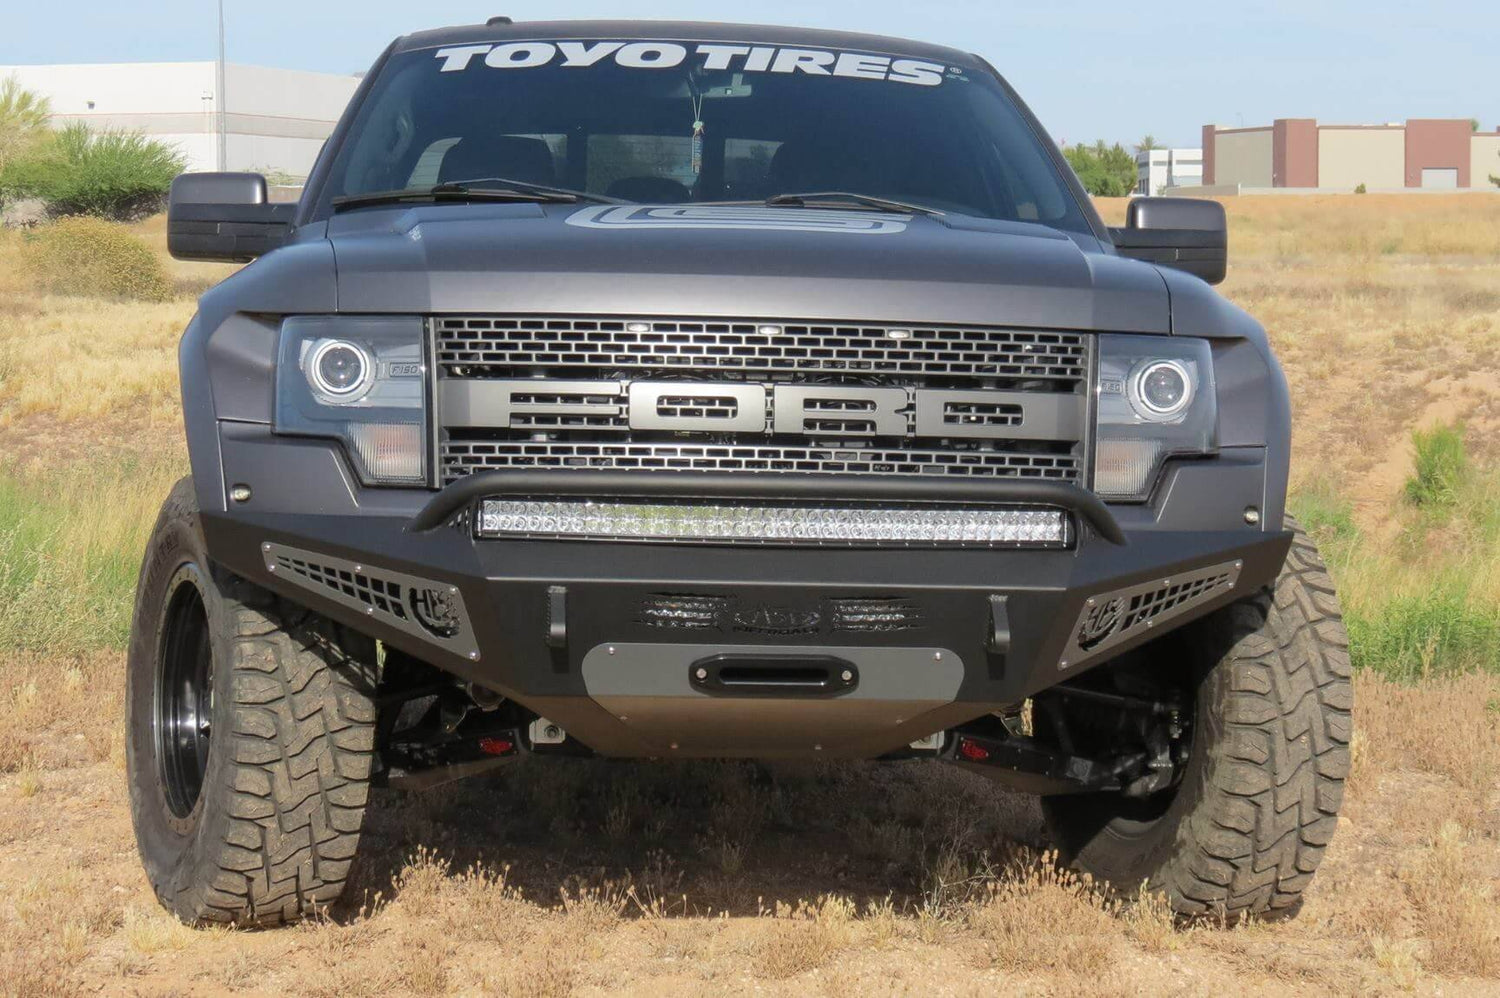 ADD F017275050103 Ford F150 Raptor 2010-2014 Honeybadger Front Bumper W/ Winch Mount and Multiple LED Light Mounts - BumperOnly